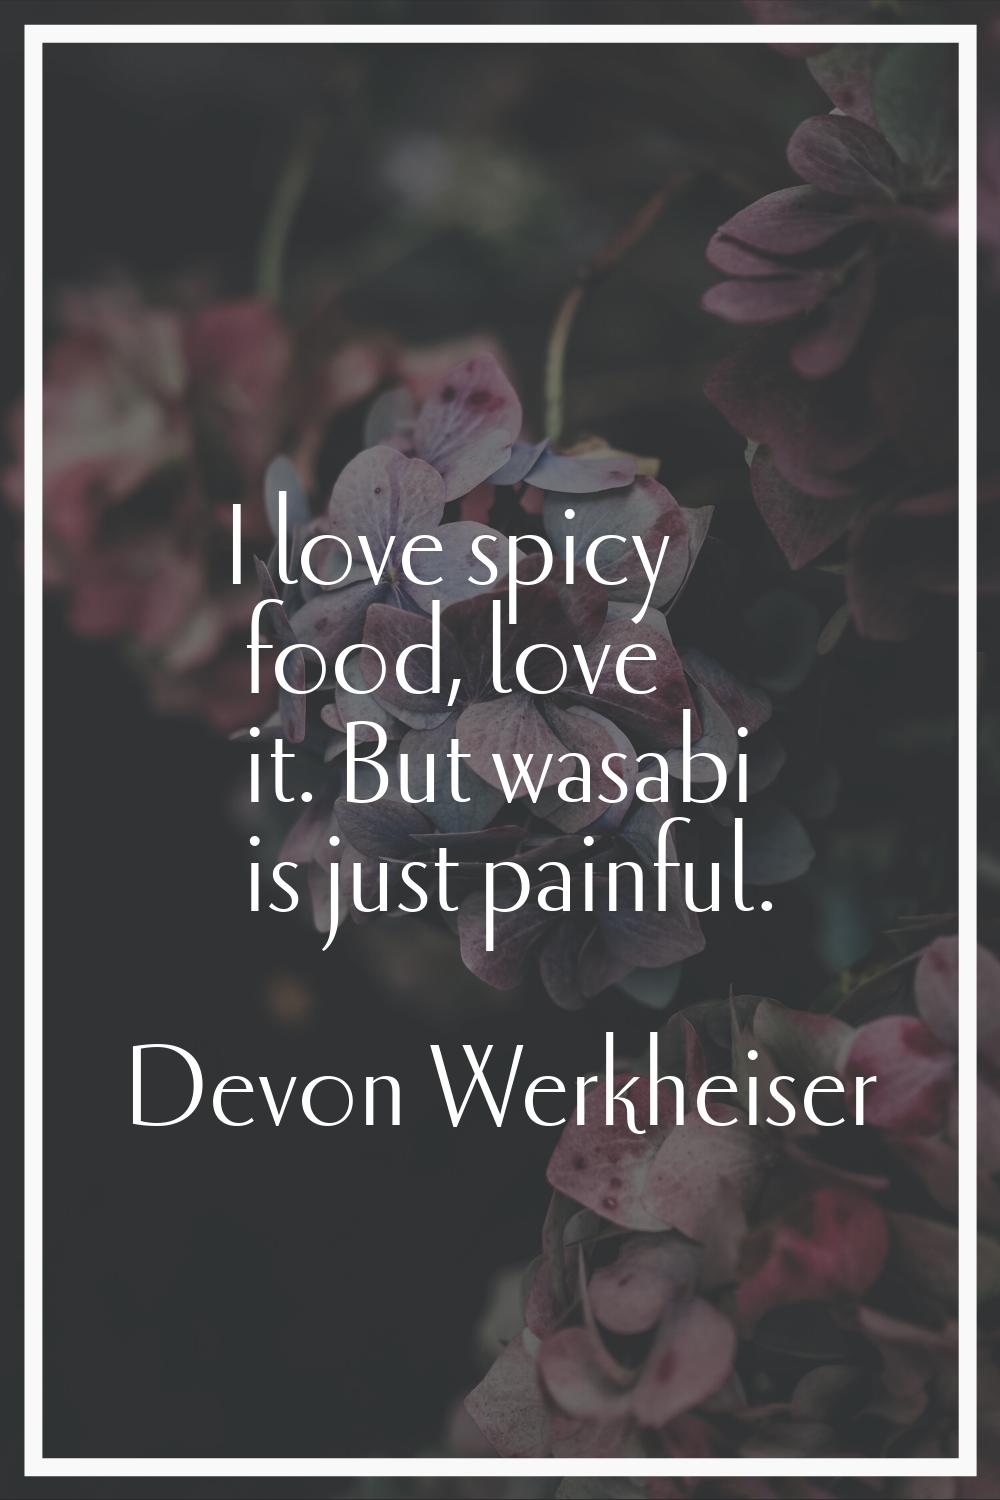 I love spicy food, love it. But wasabi is just painful.